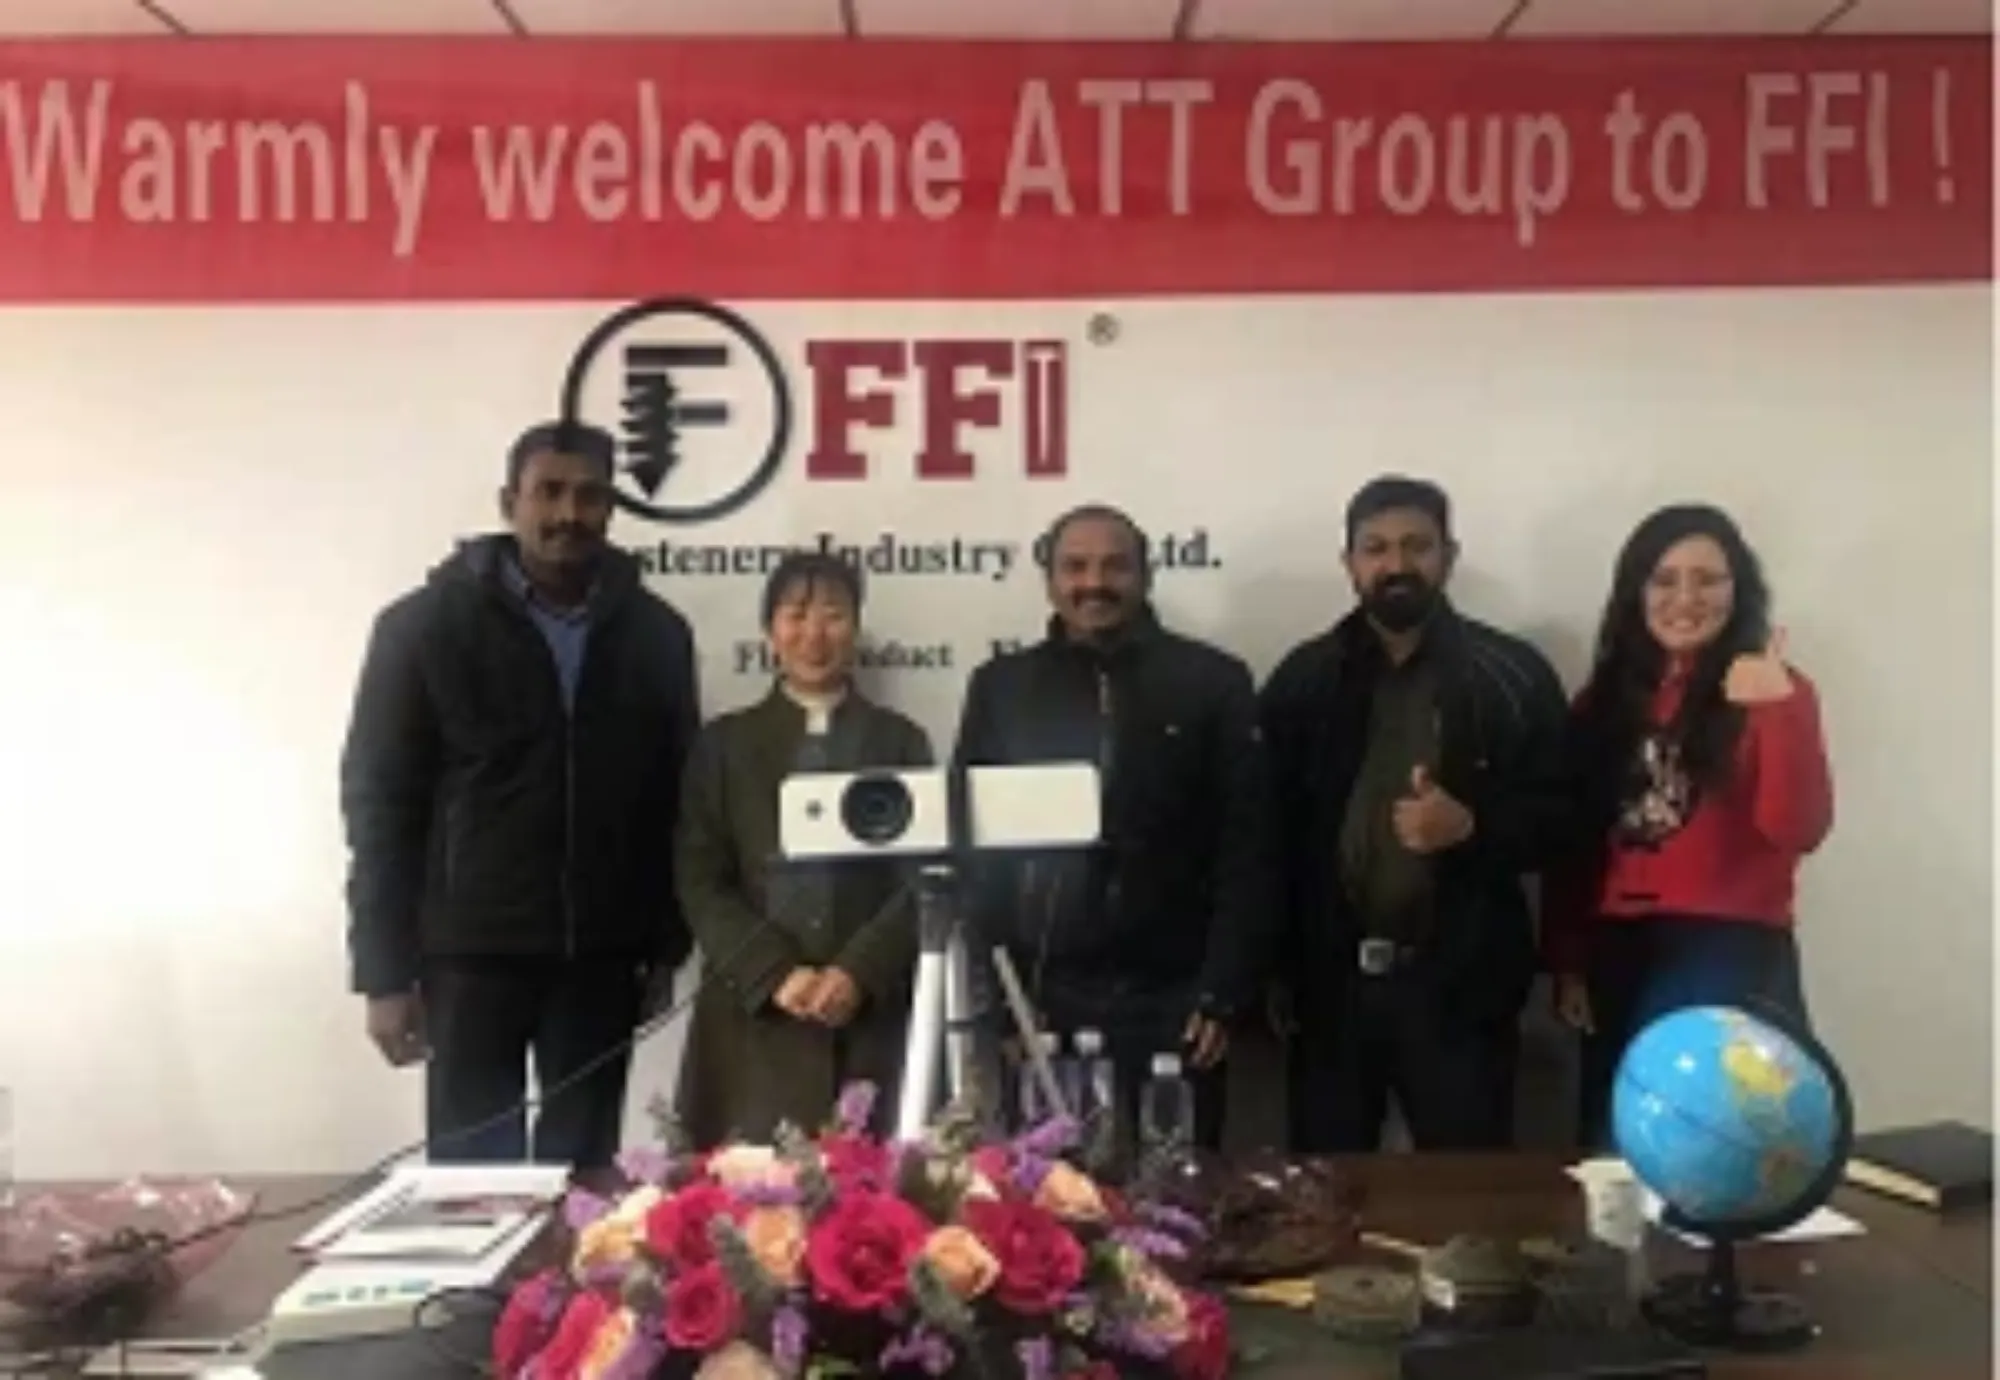 Shake With Big Hand In The World. ——Warmly Welcome AAT Group To Visit FFI!